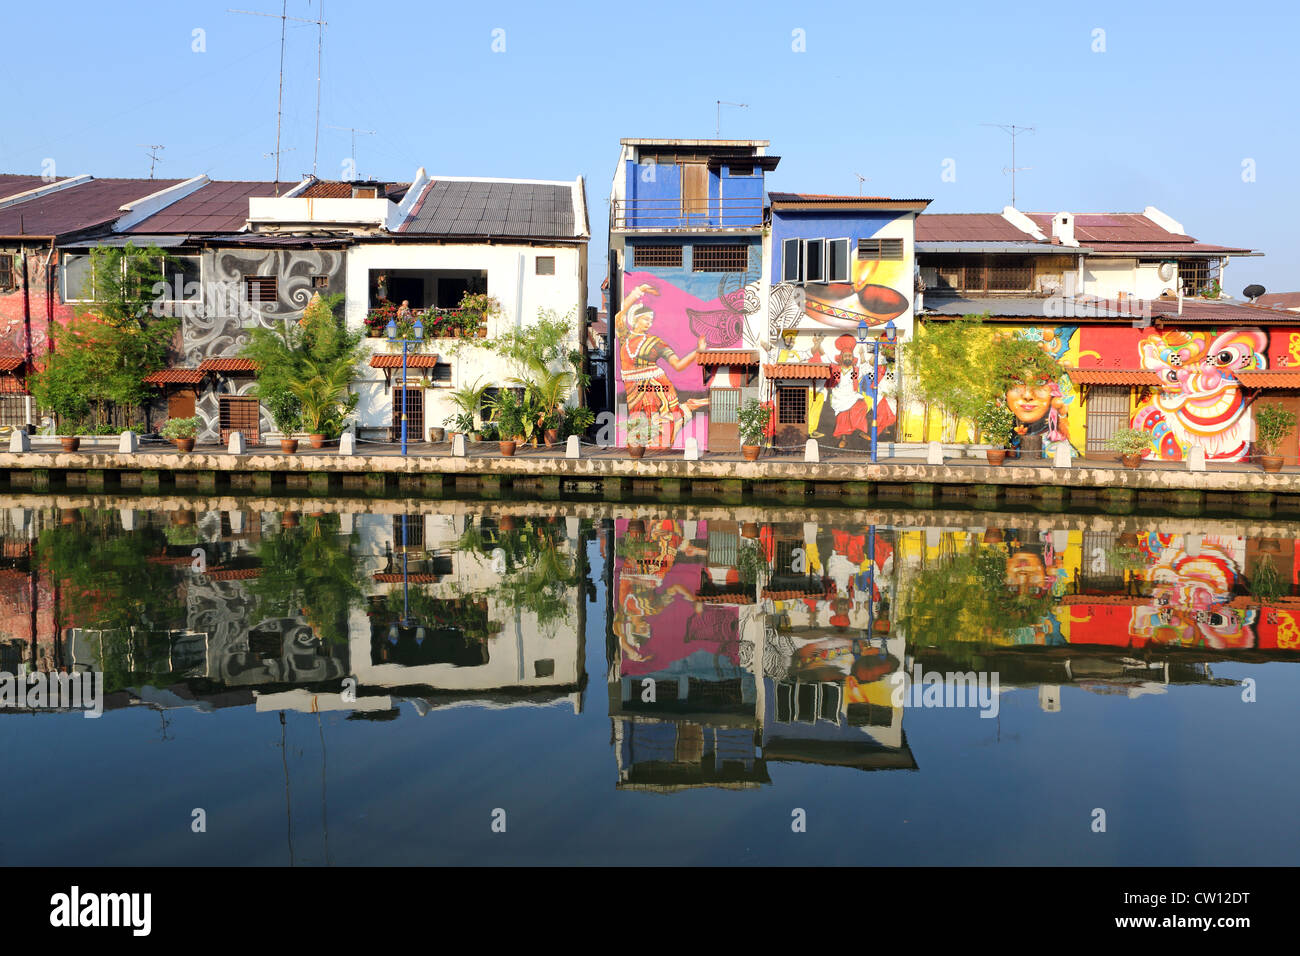 Brightly colored heritage buildings painted with murals align the Melaka River in Melaka, Malaysia Stock Photo